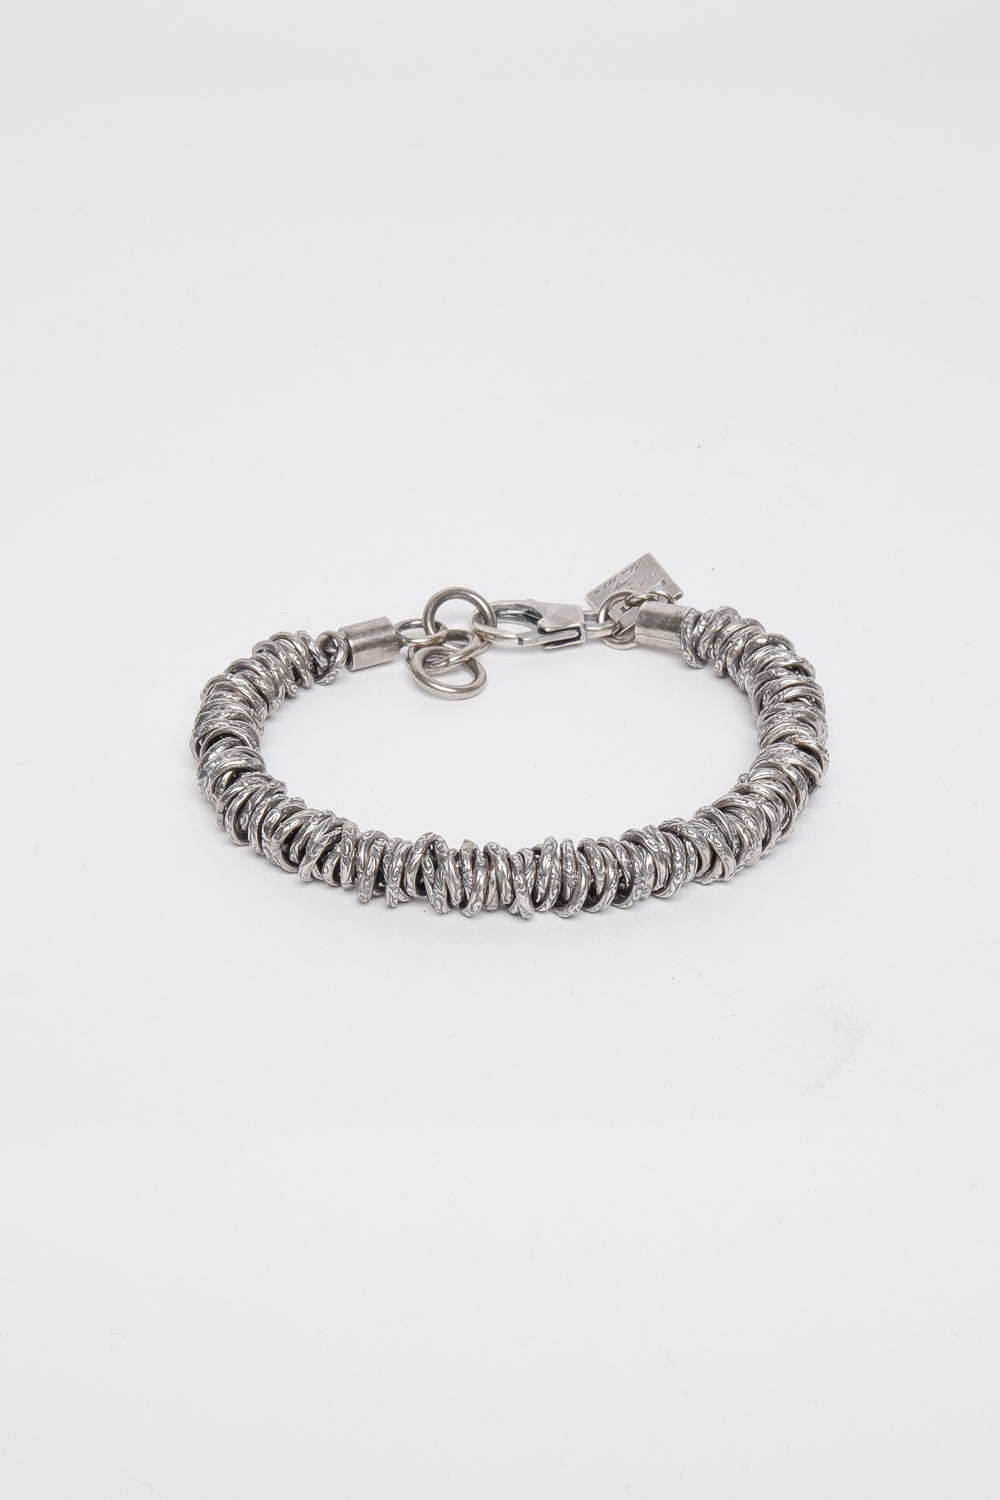 Buy the GOTI BR536 Bracelet at Intro. Spend £50 for free UK delivery. Official stockists. We ship worldwide.